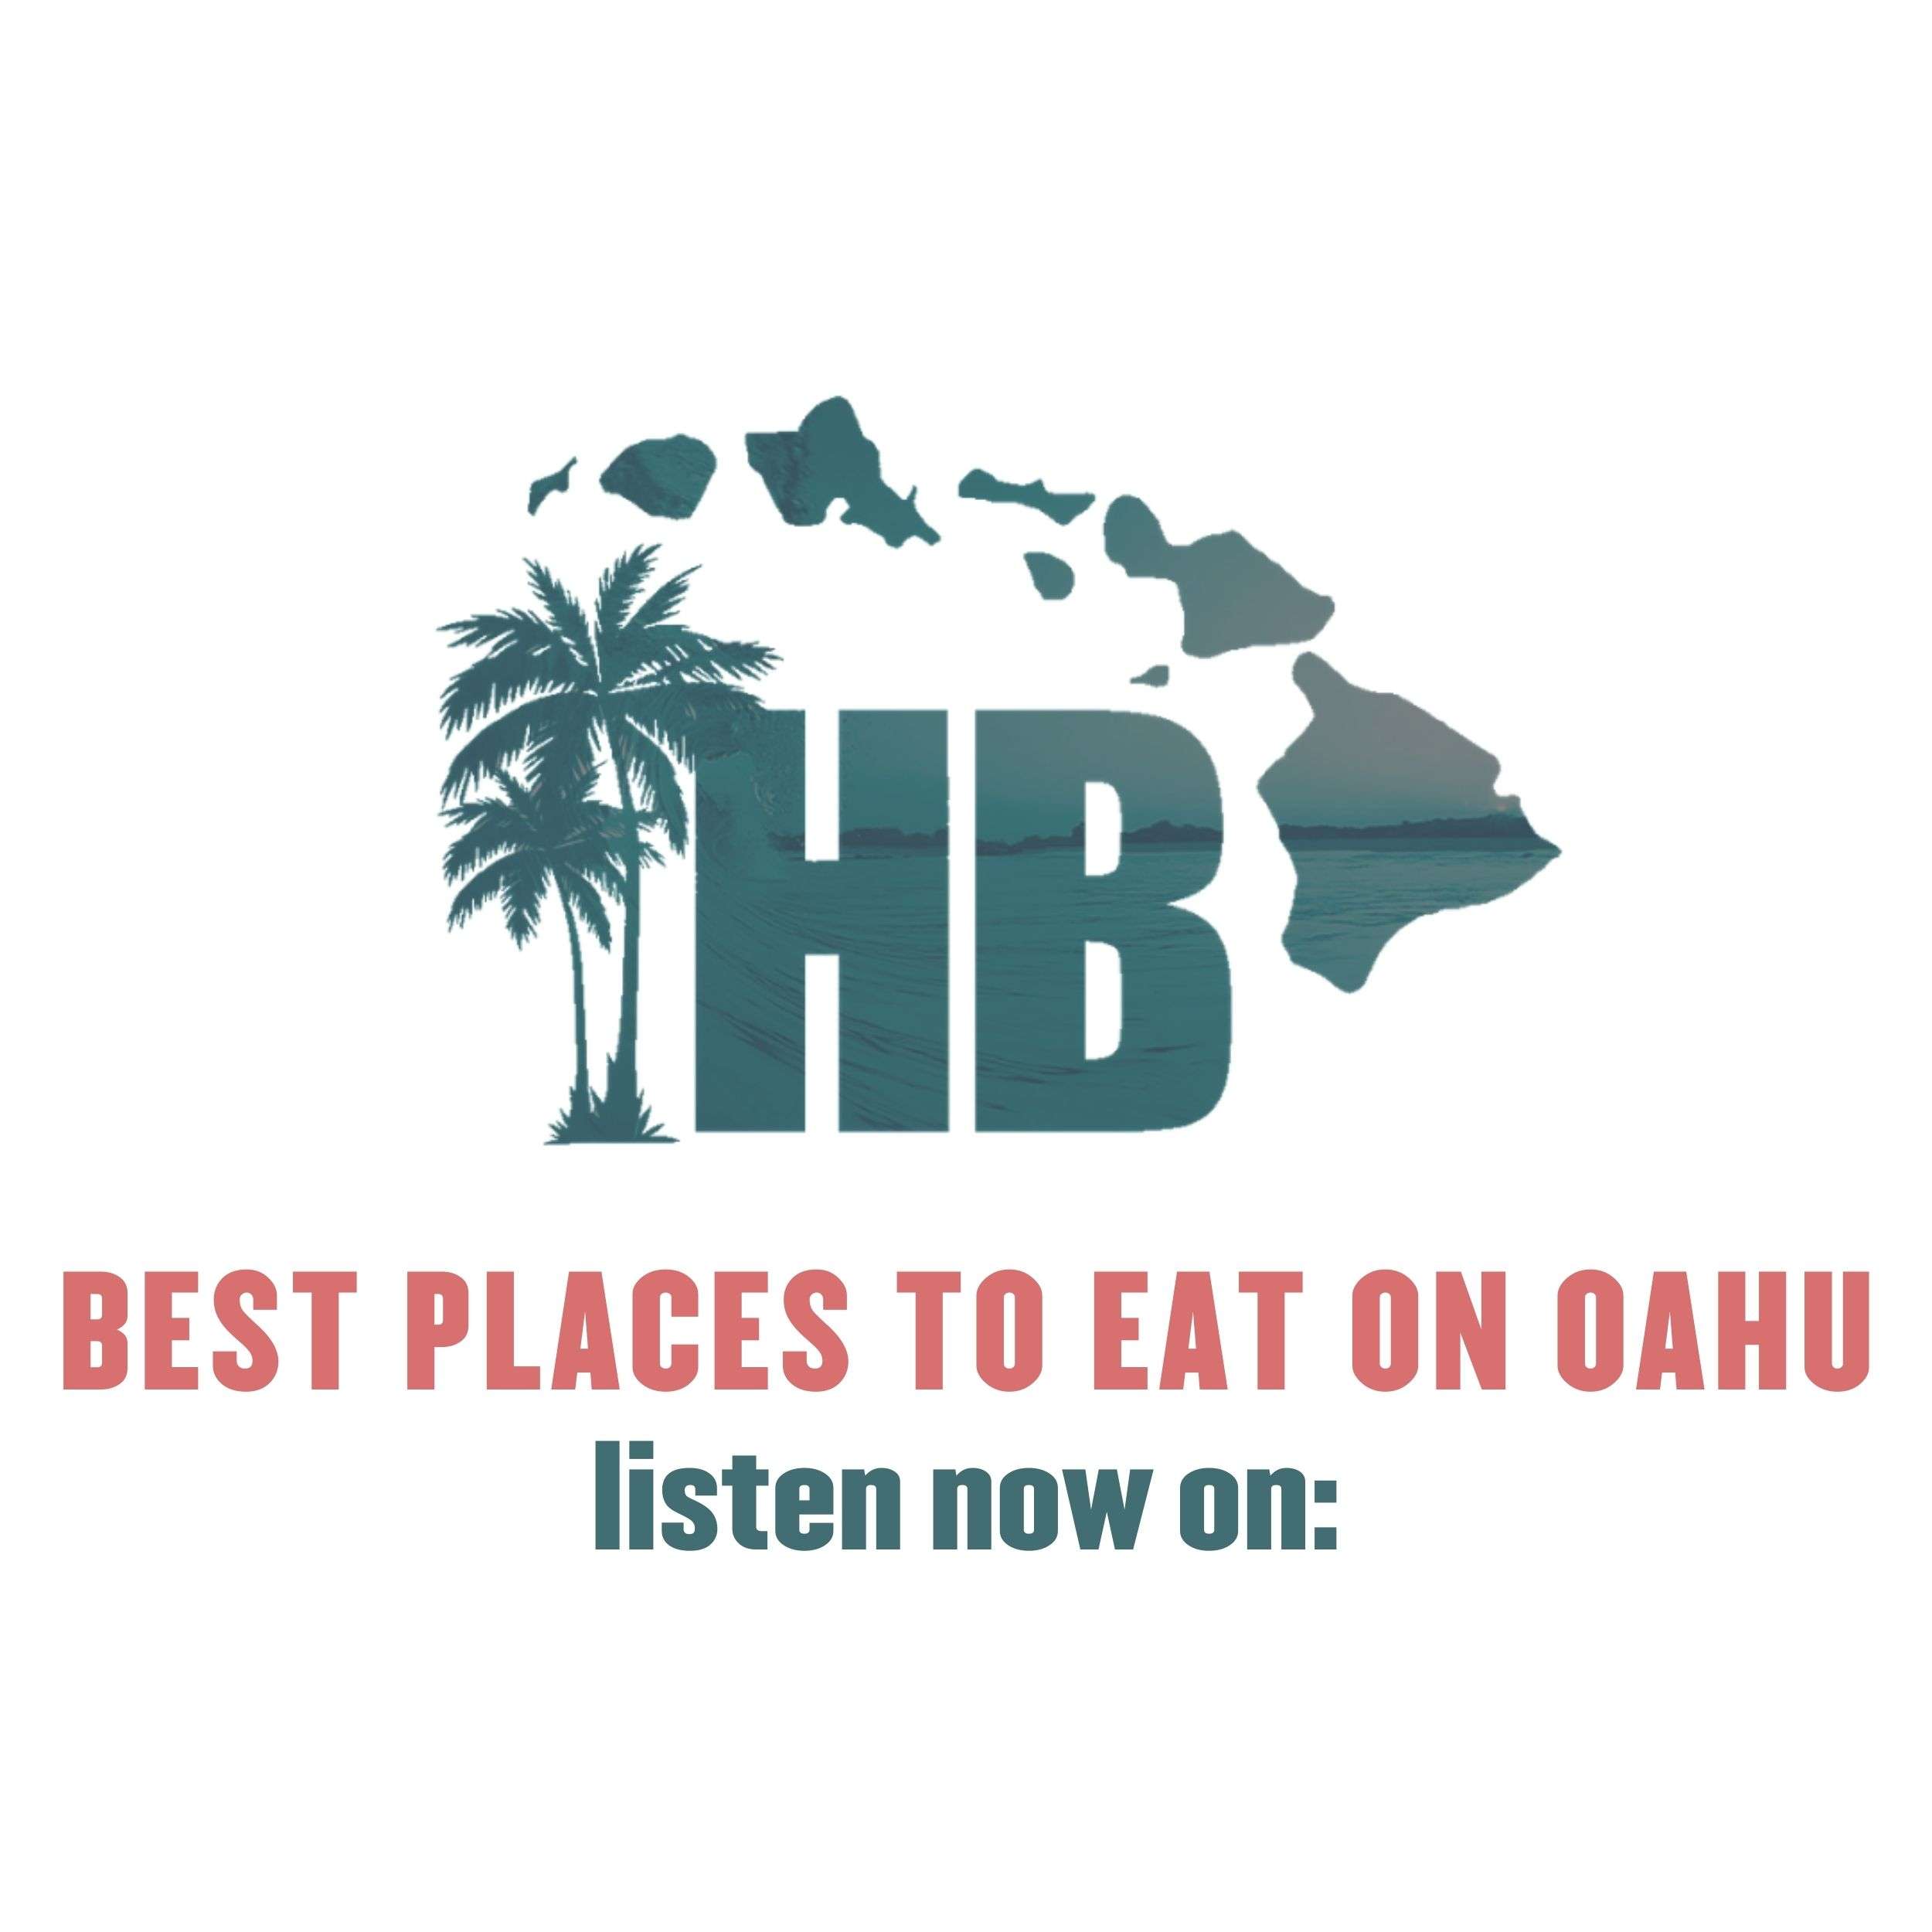 best places to eat oahu